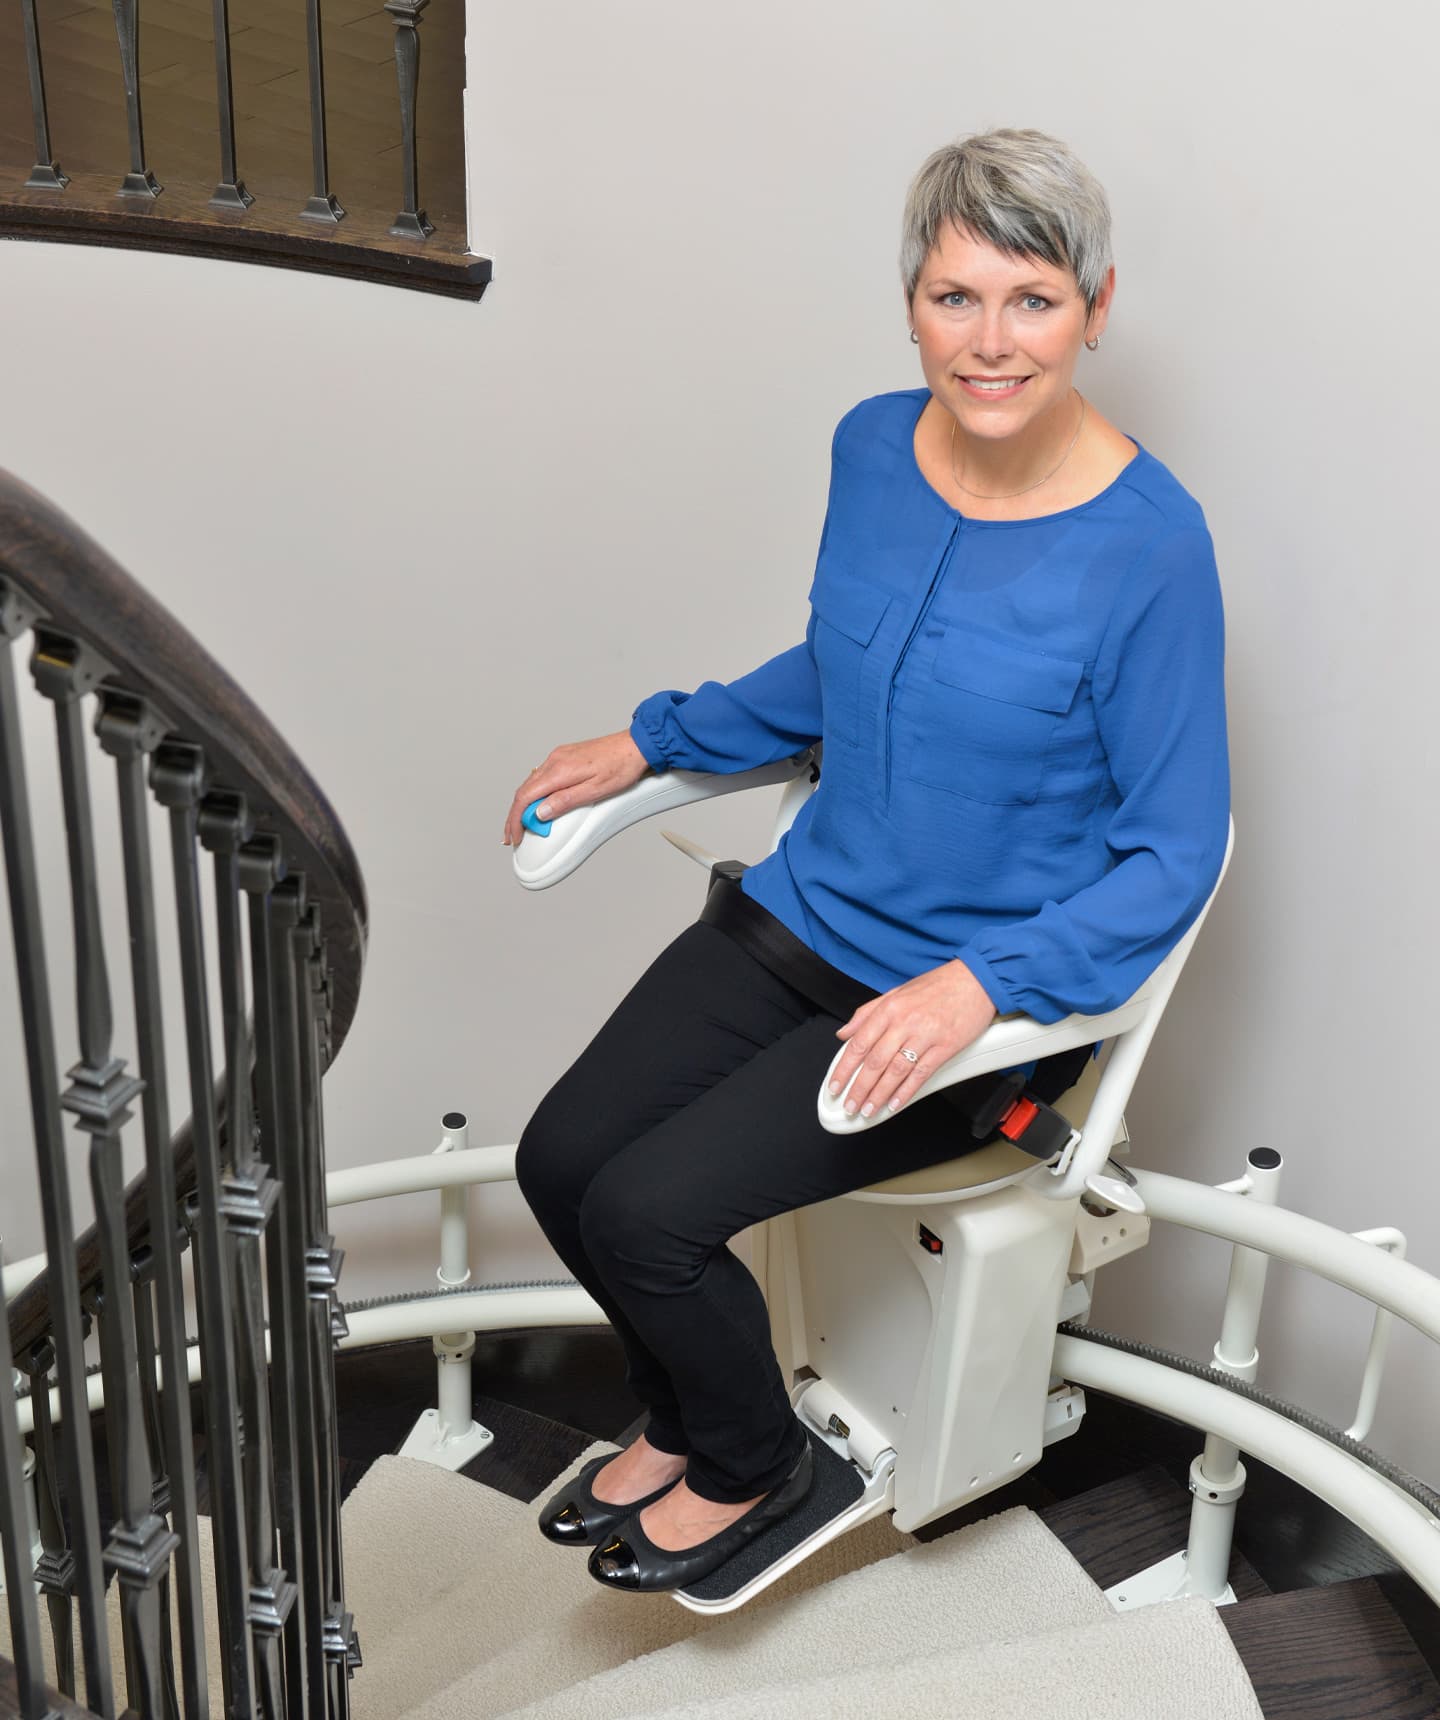 Woman on a Stairfriend stairlift riding up a set of curved stairs